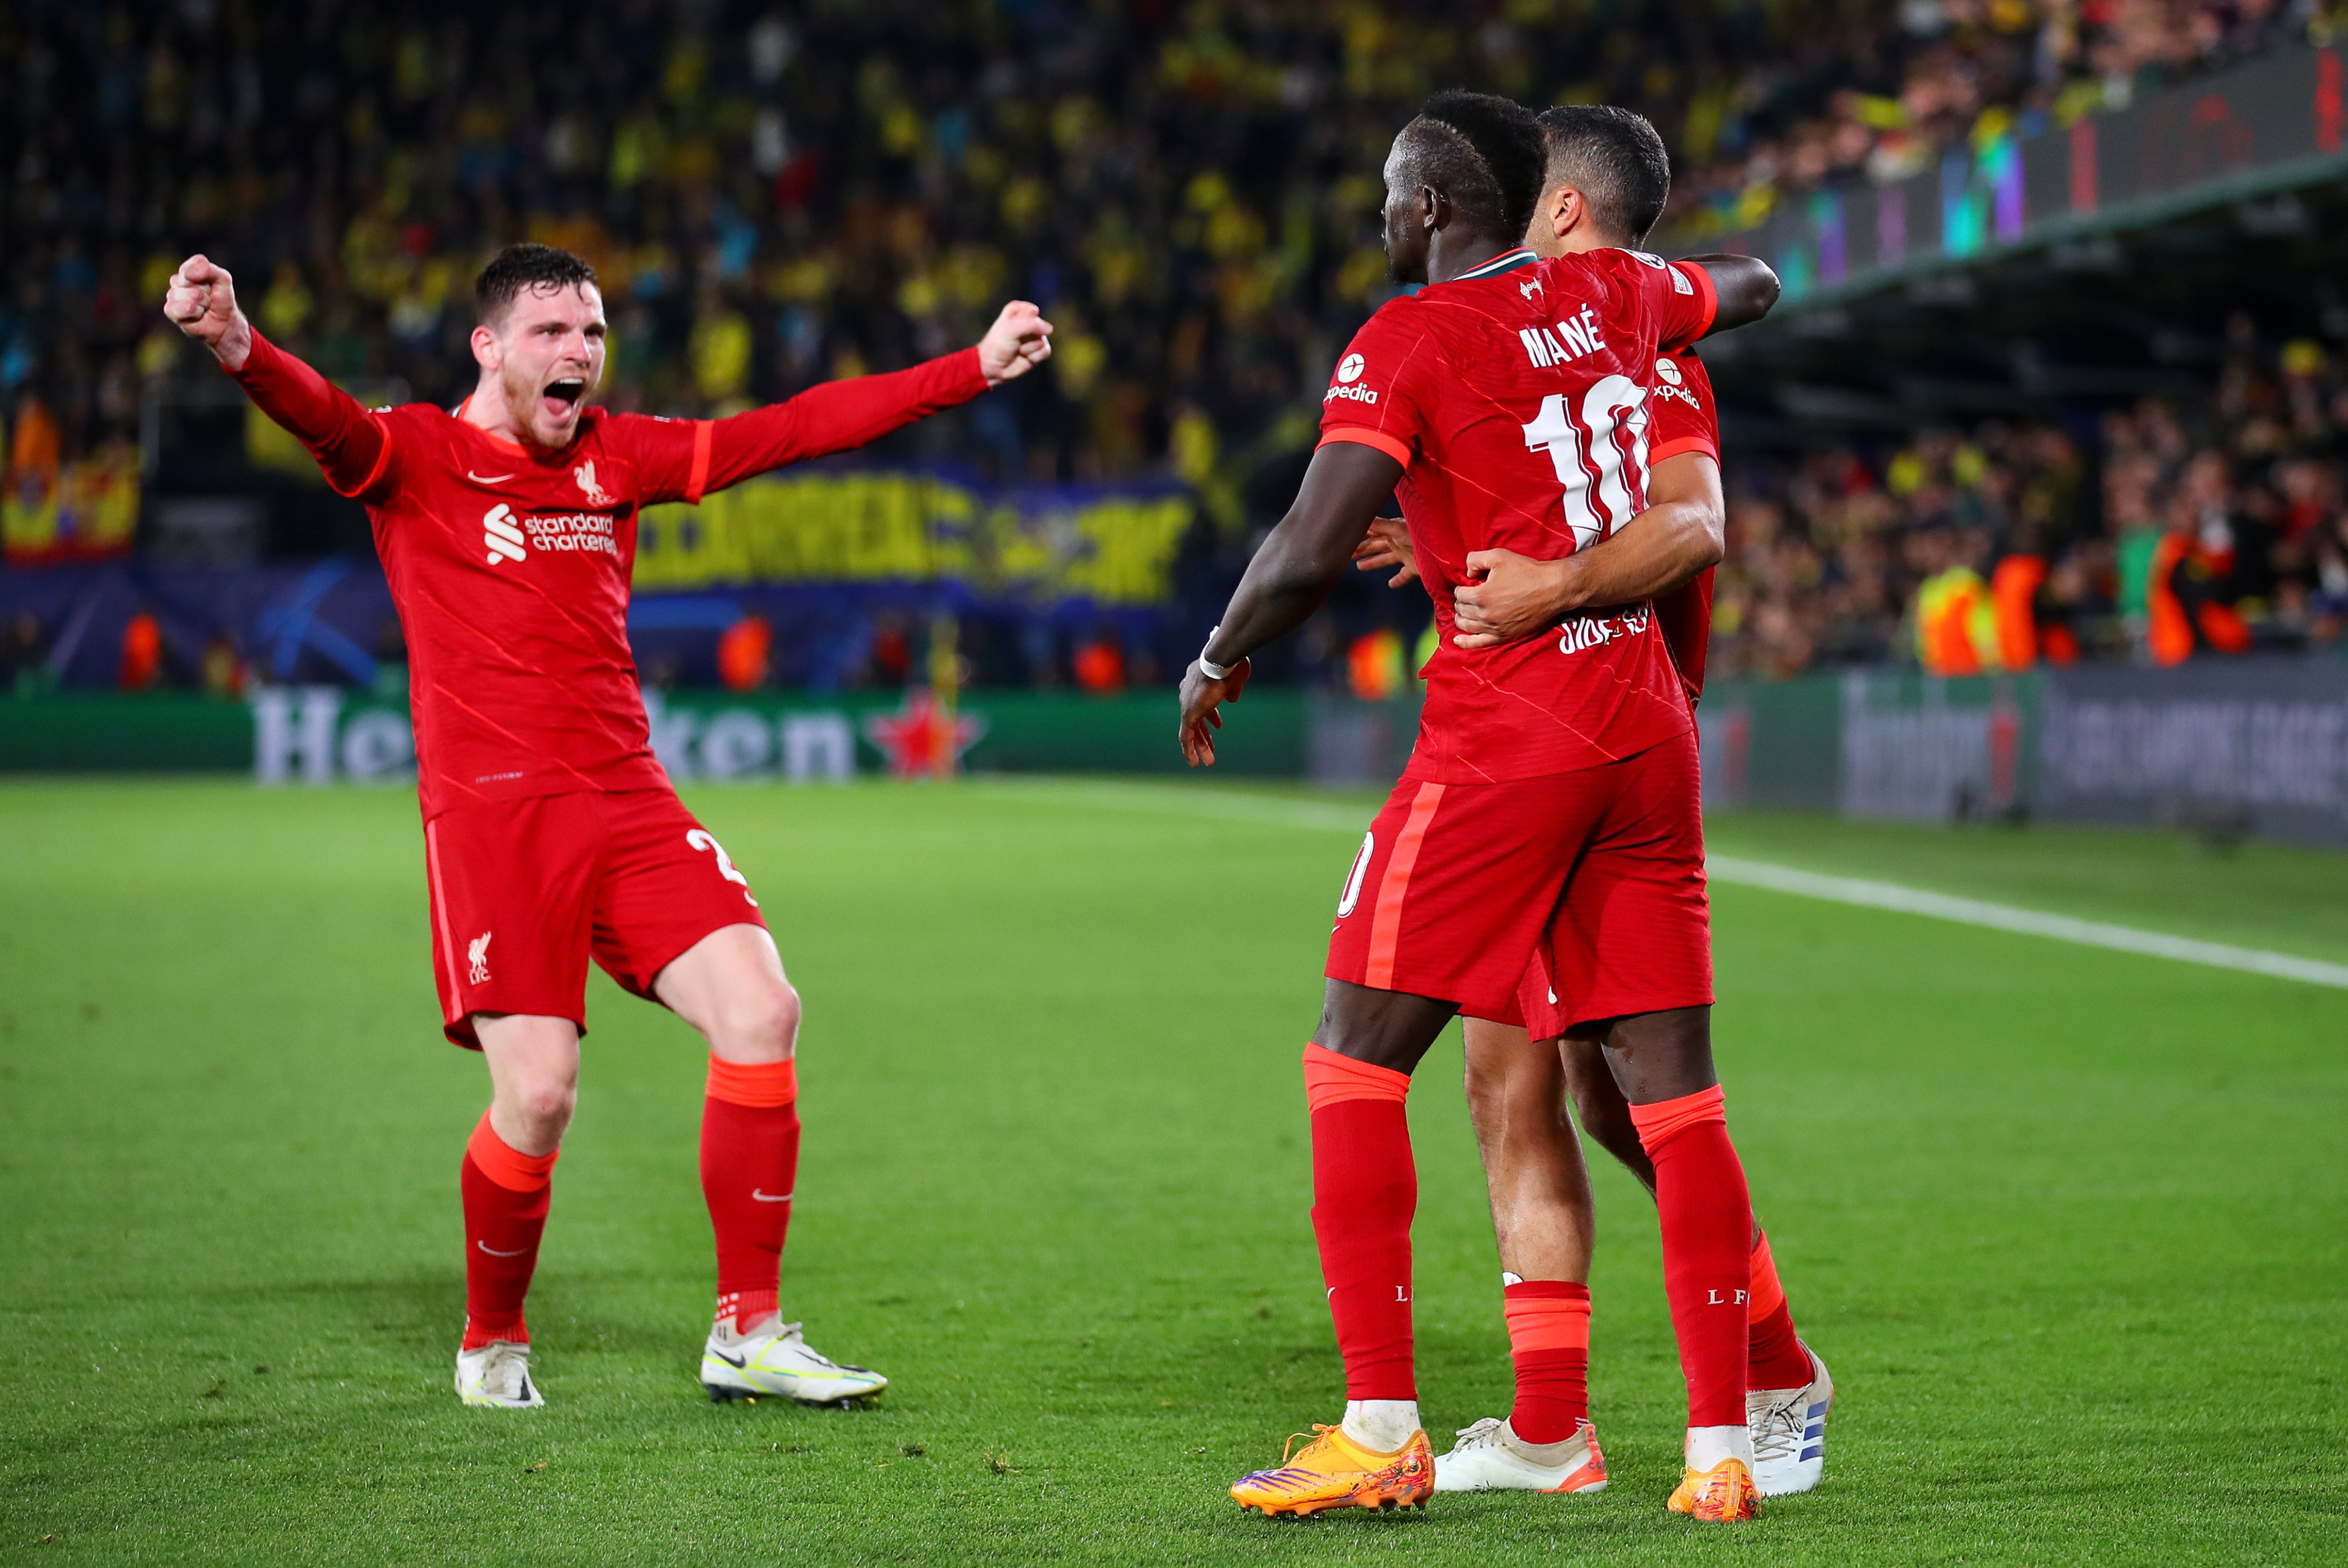 Champions League Semi-Final: Liverpool beat 10-men Villarreal in stunning 2nd half COMEBACK to reach Champions League FINAL: Liverpool beat Villarreal 5-2 on Aggregate, Watch HIGHLIGHTS